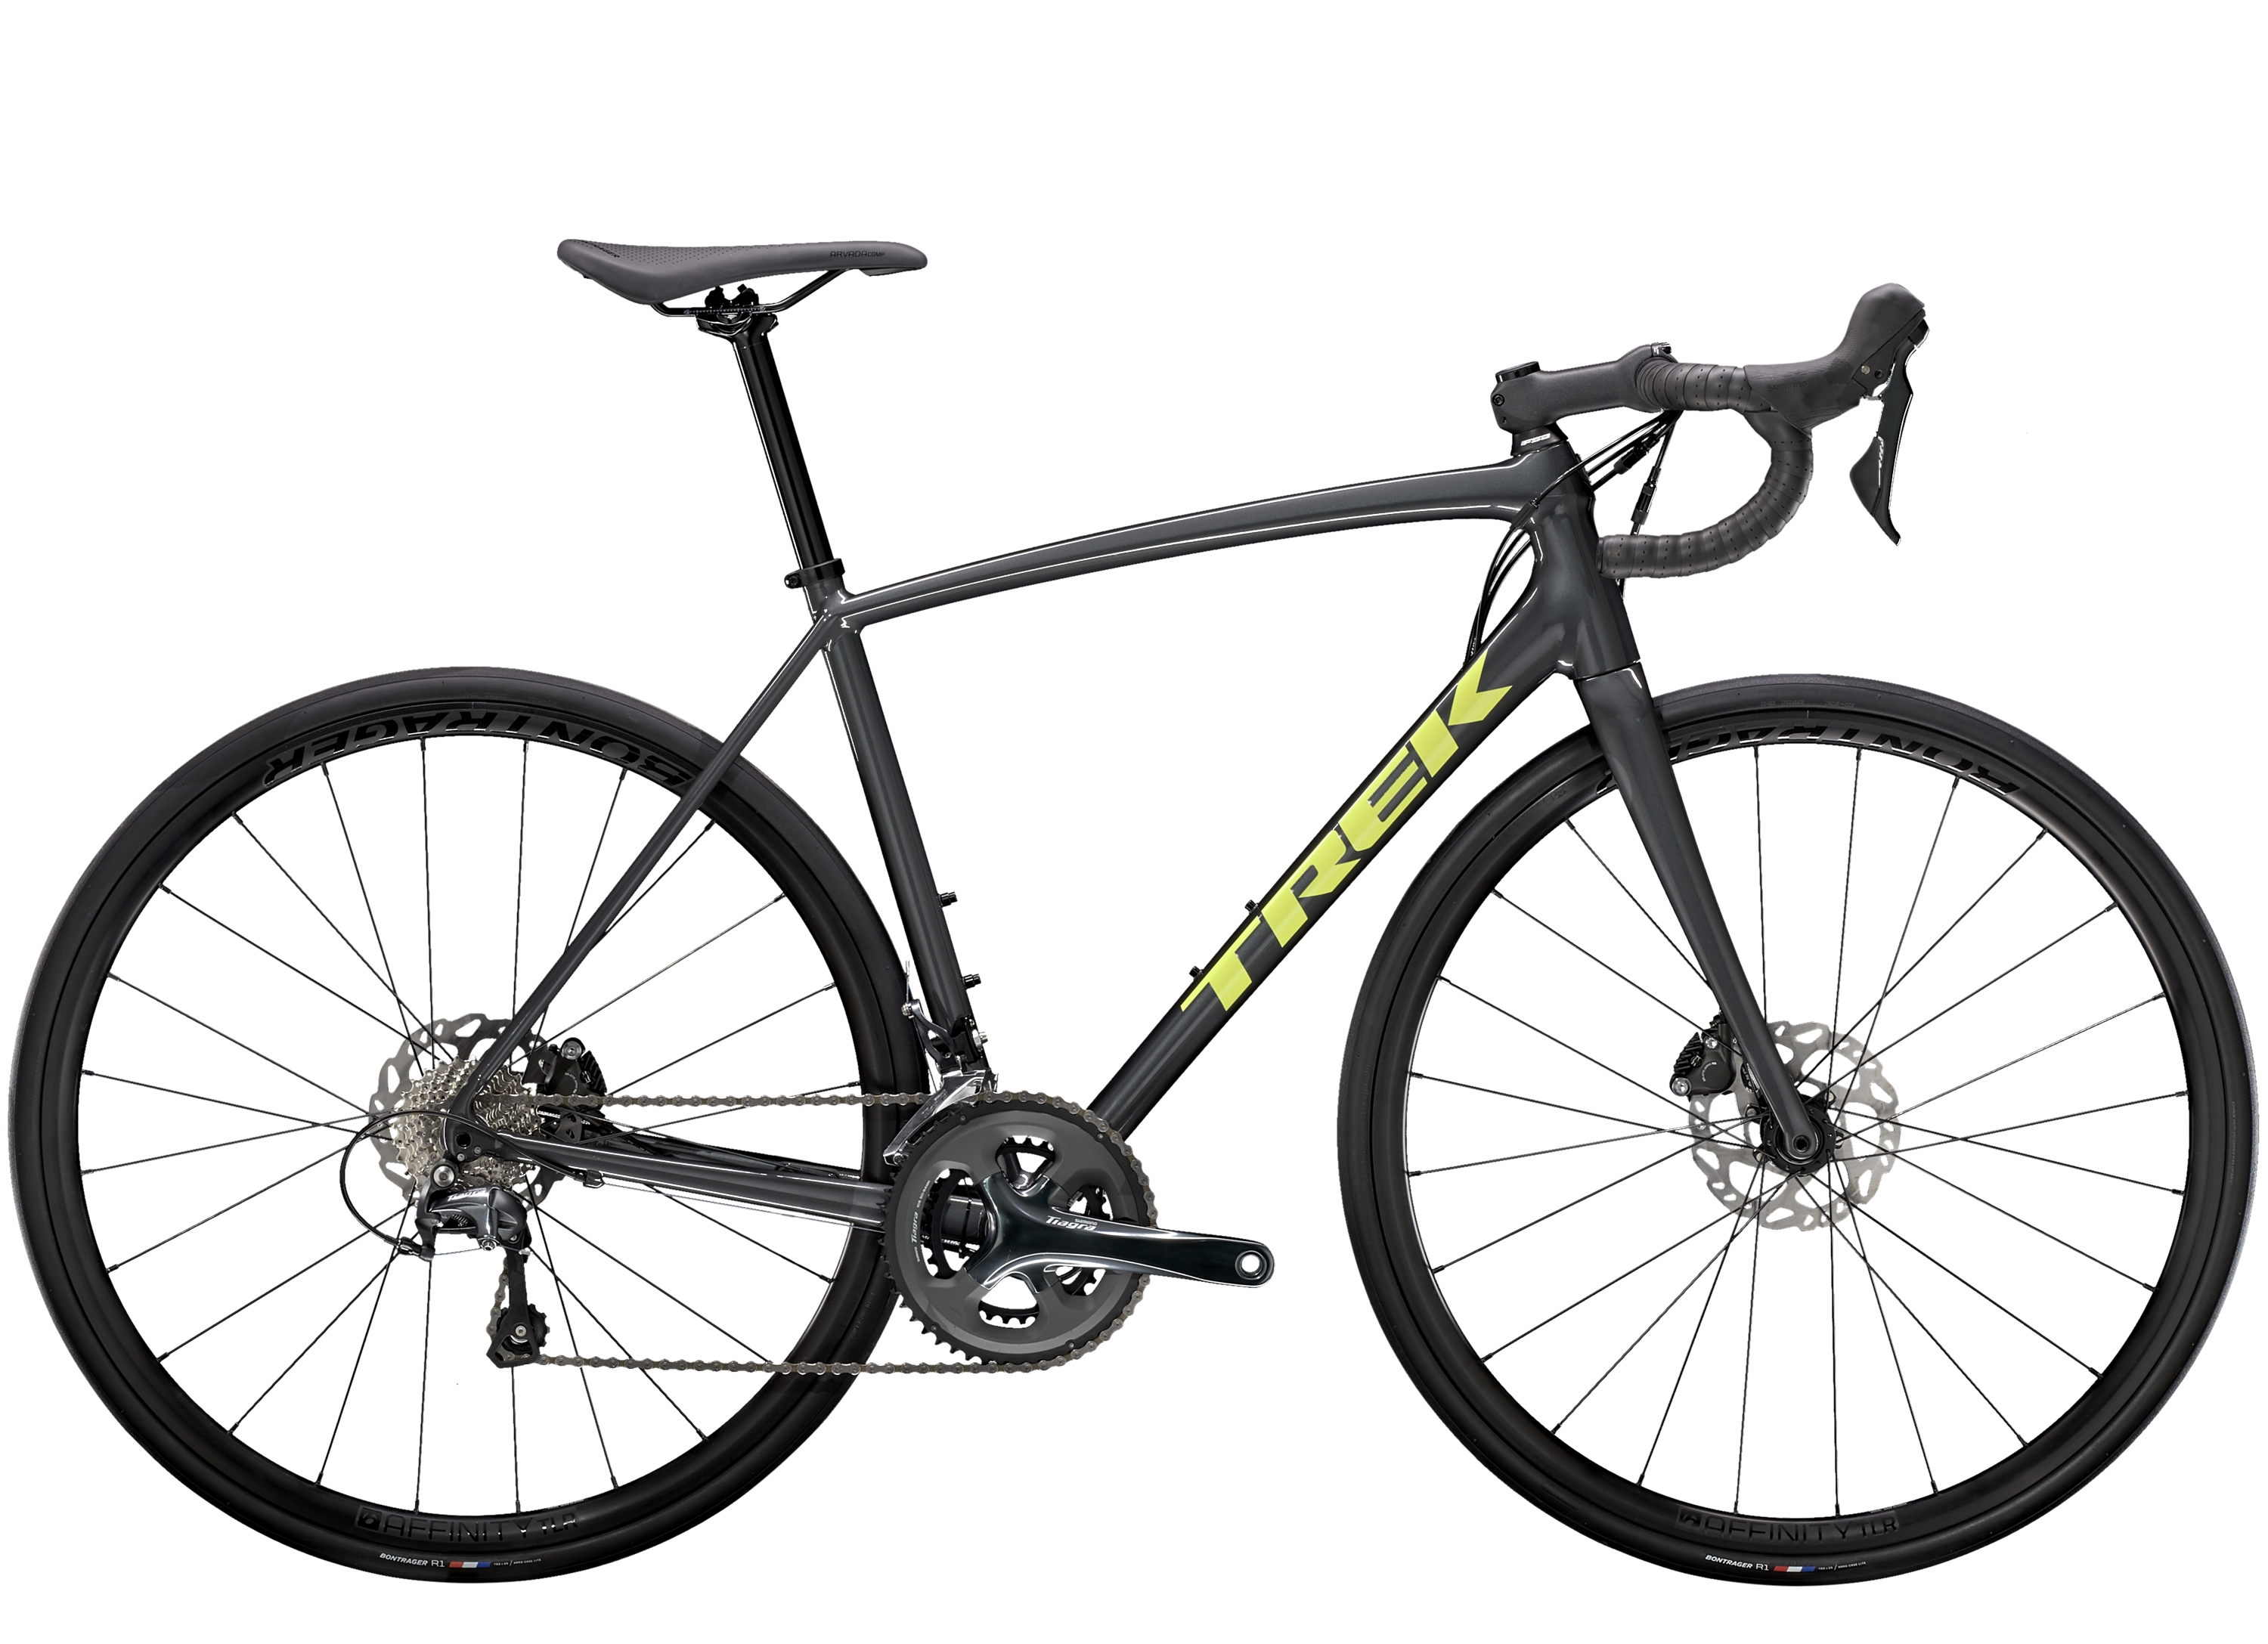 <a href="https://cycles-clement.be/product/emonda-alr-4-disc-54-lithium-grey-na/">EMONDA ALR 4 DISC 54 LITHIUM GREY NA</a>